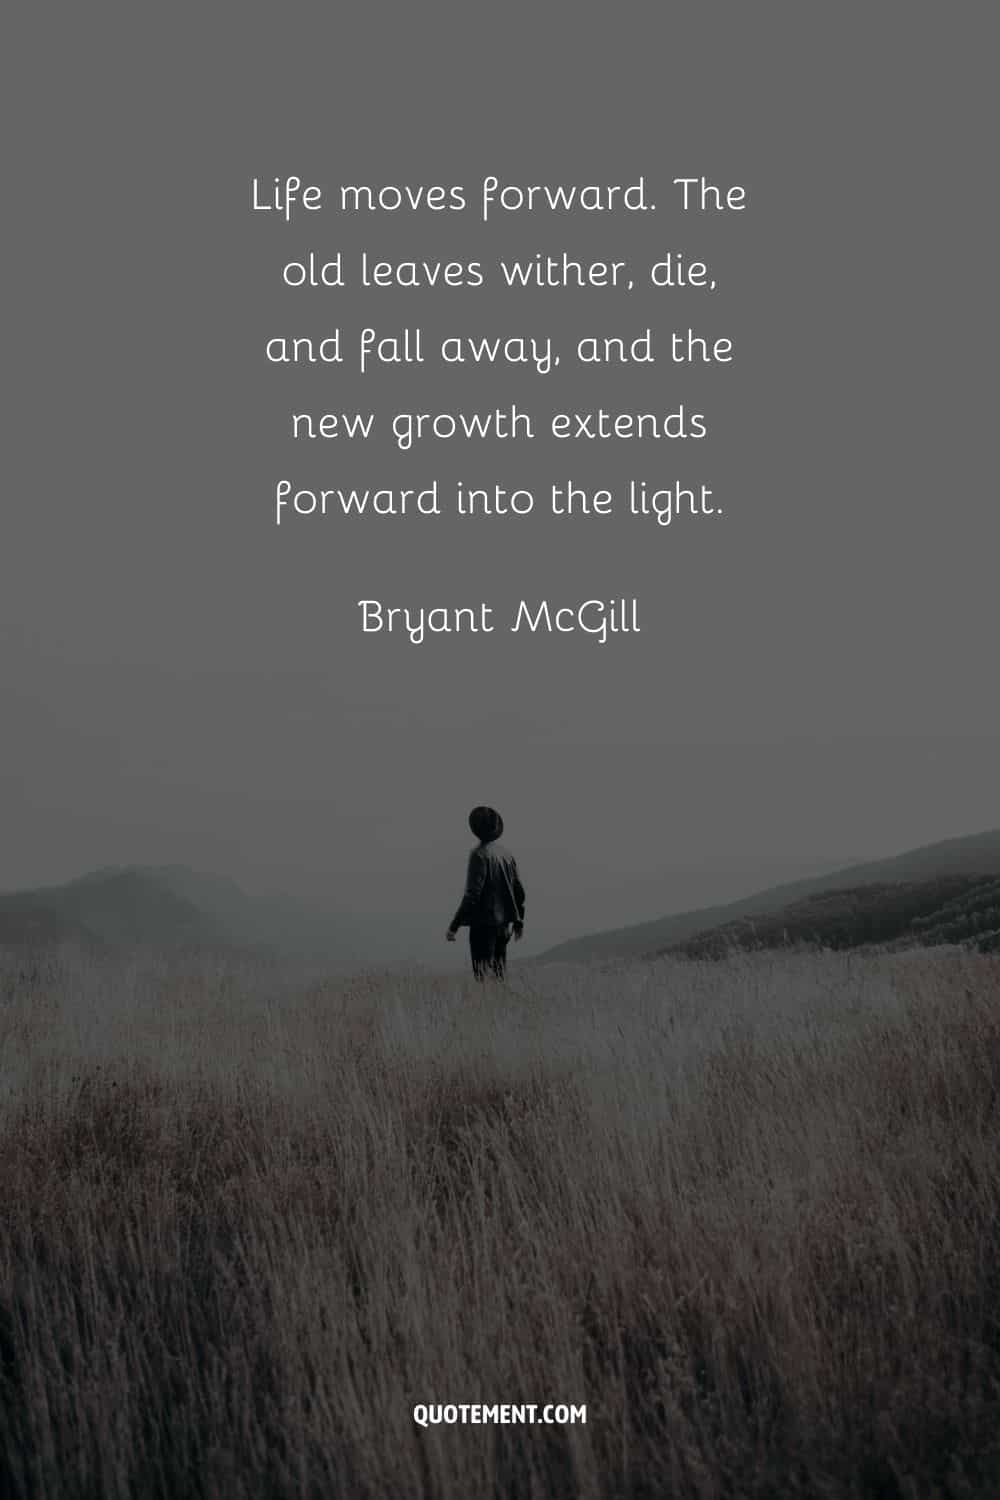 Life moves forward. The old leaves wither, die, and fall away, and the new growth extends forward into the light. — Bryant McGill